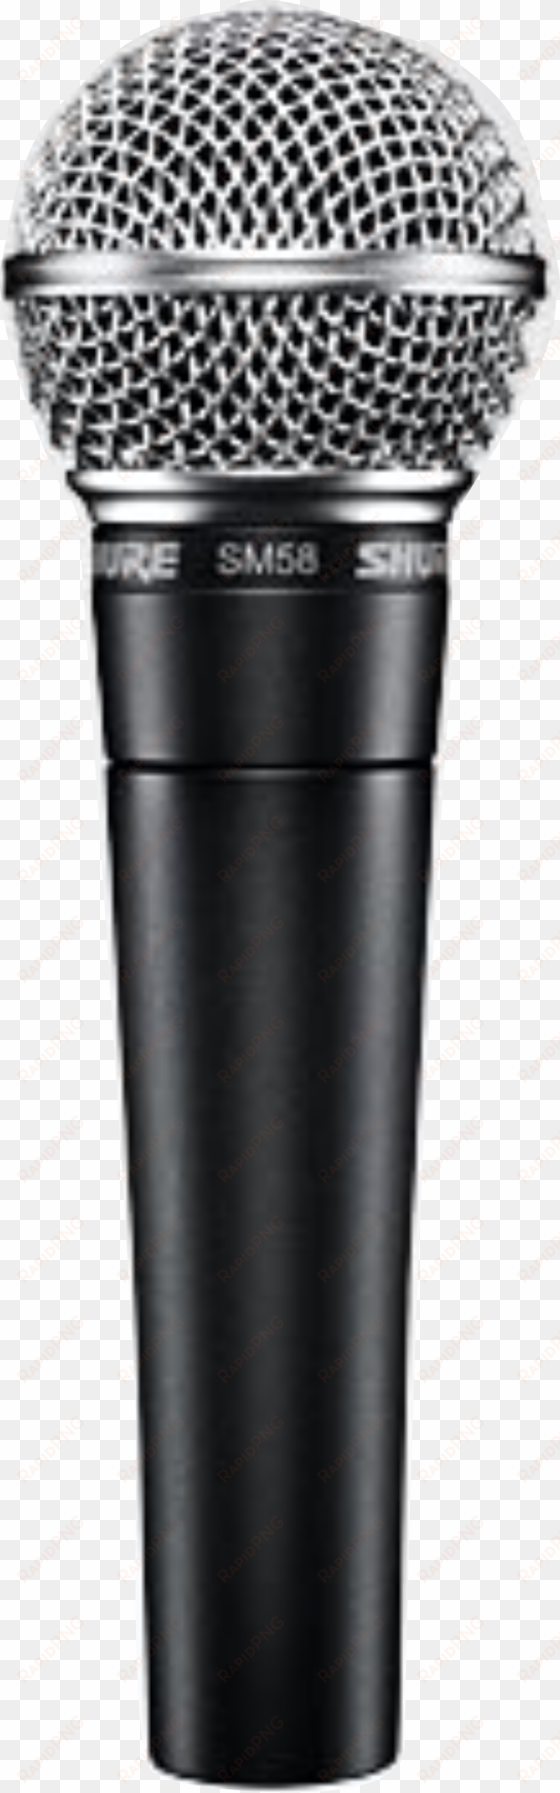 Microphone Png Image - Shure Sm58-lc Cardioid Dynamic Vocal Microphone W/ transparent png image